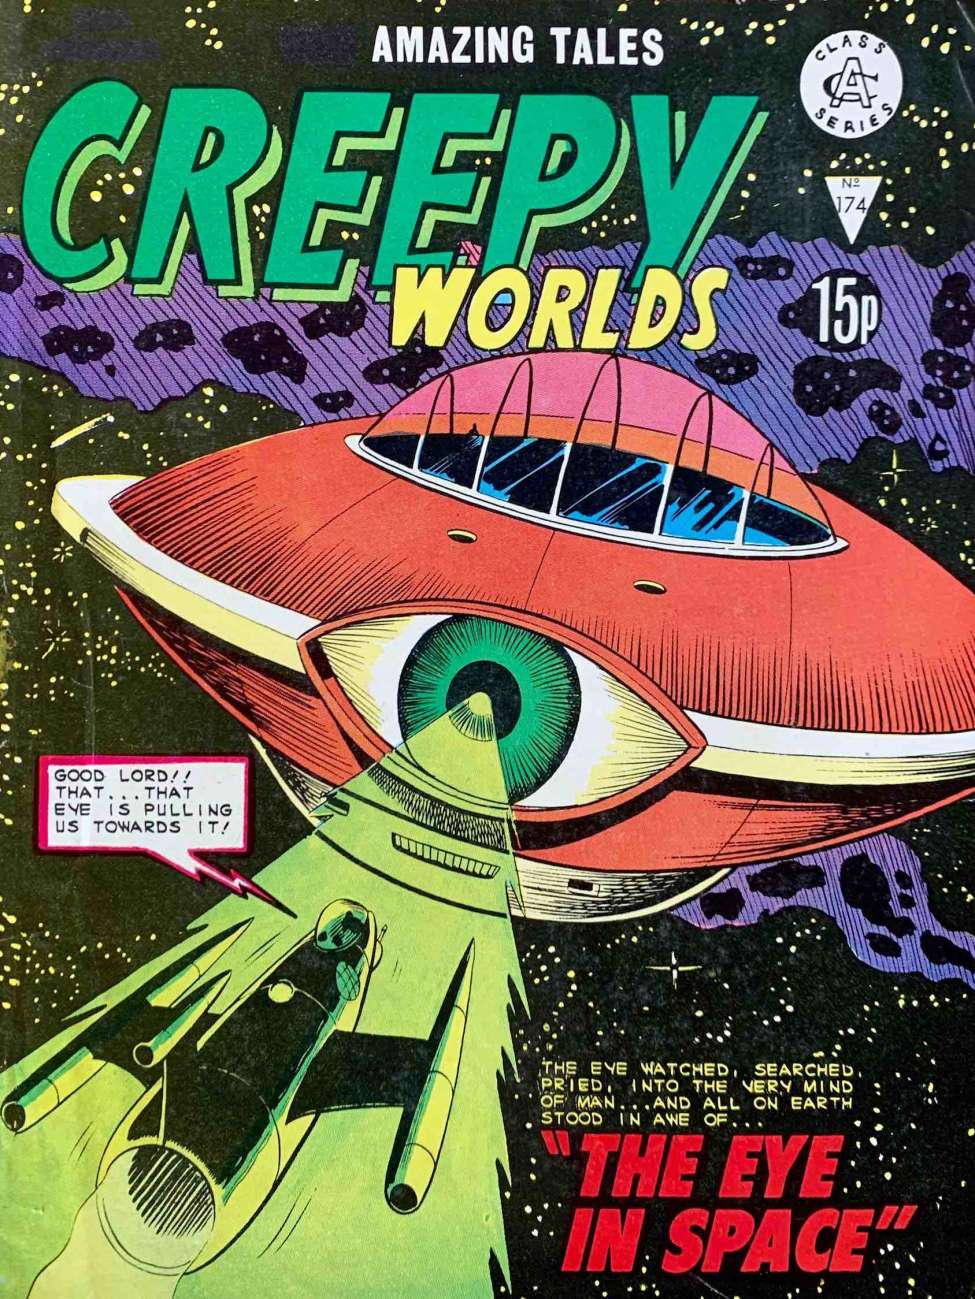 Book Cover For Creepy Worlds 174